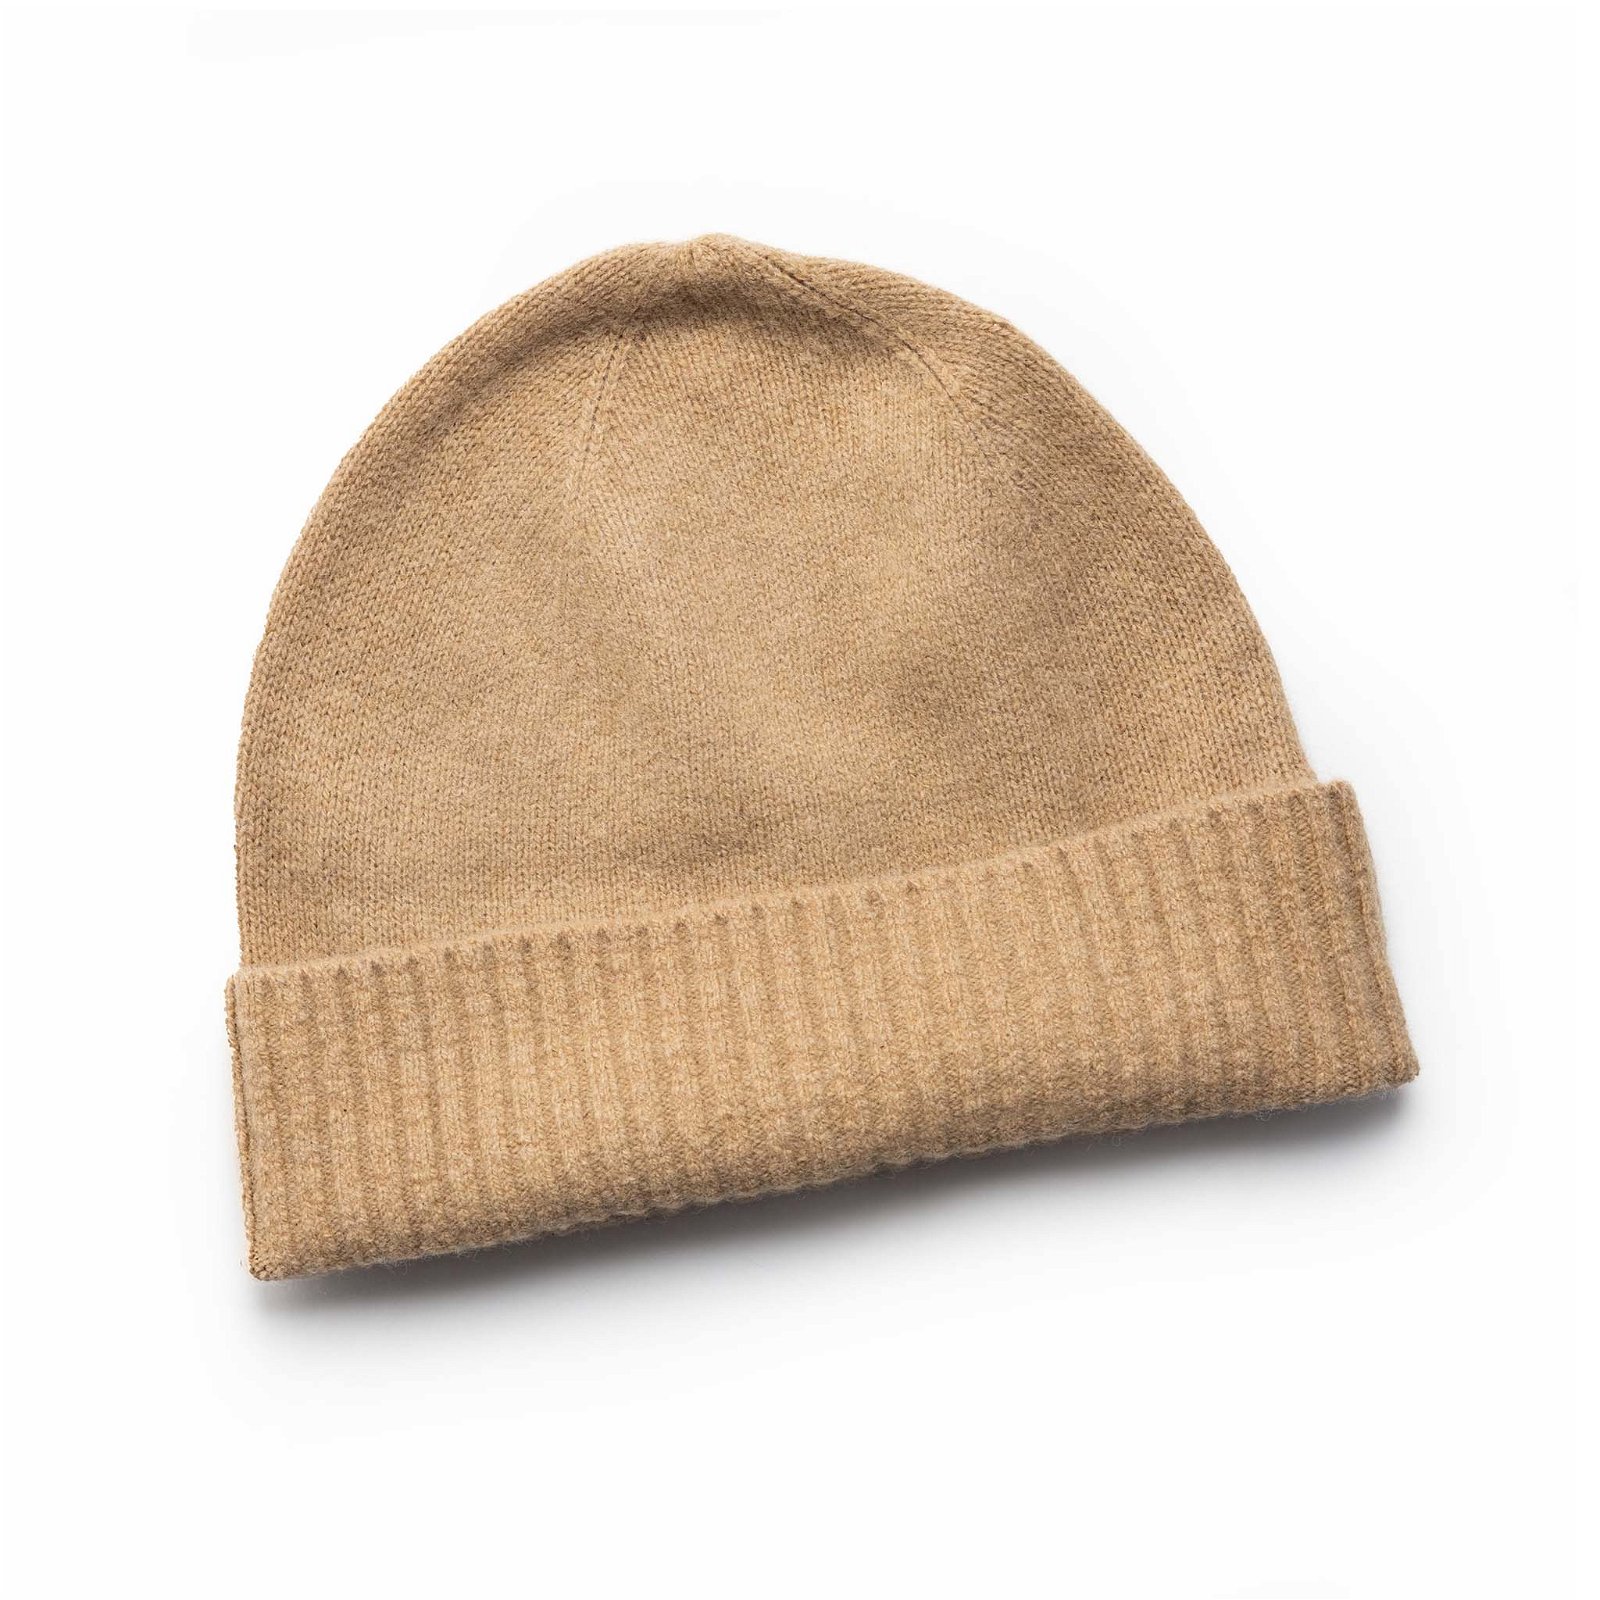 Image of The Lodge Beanie in Camel